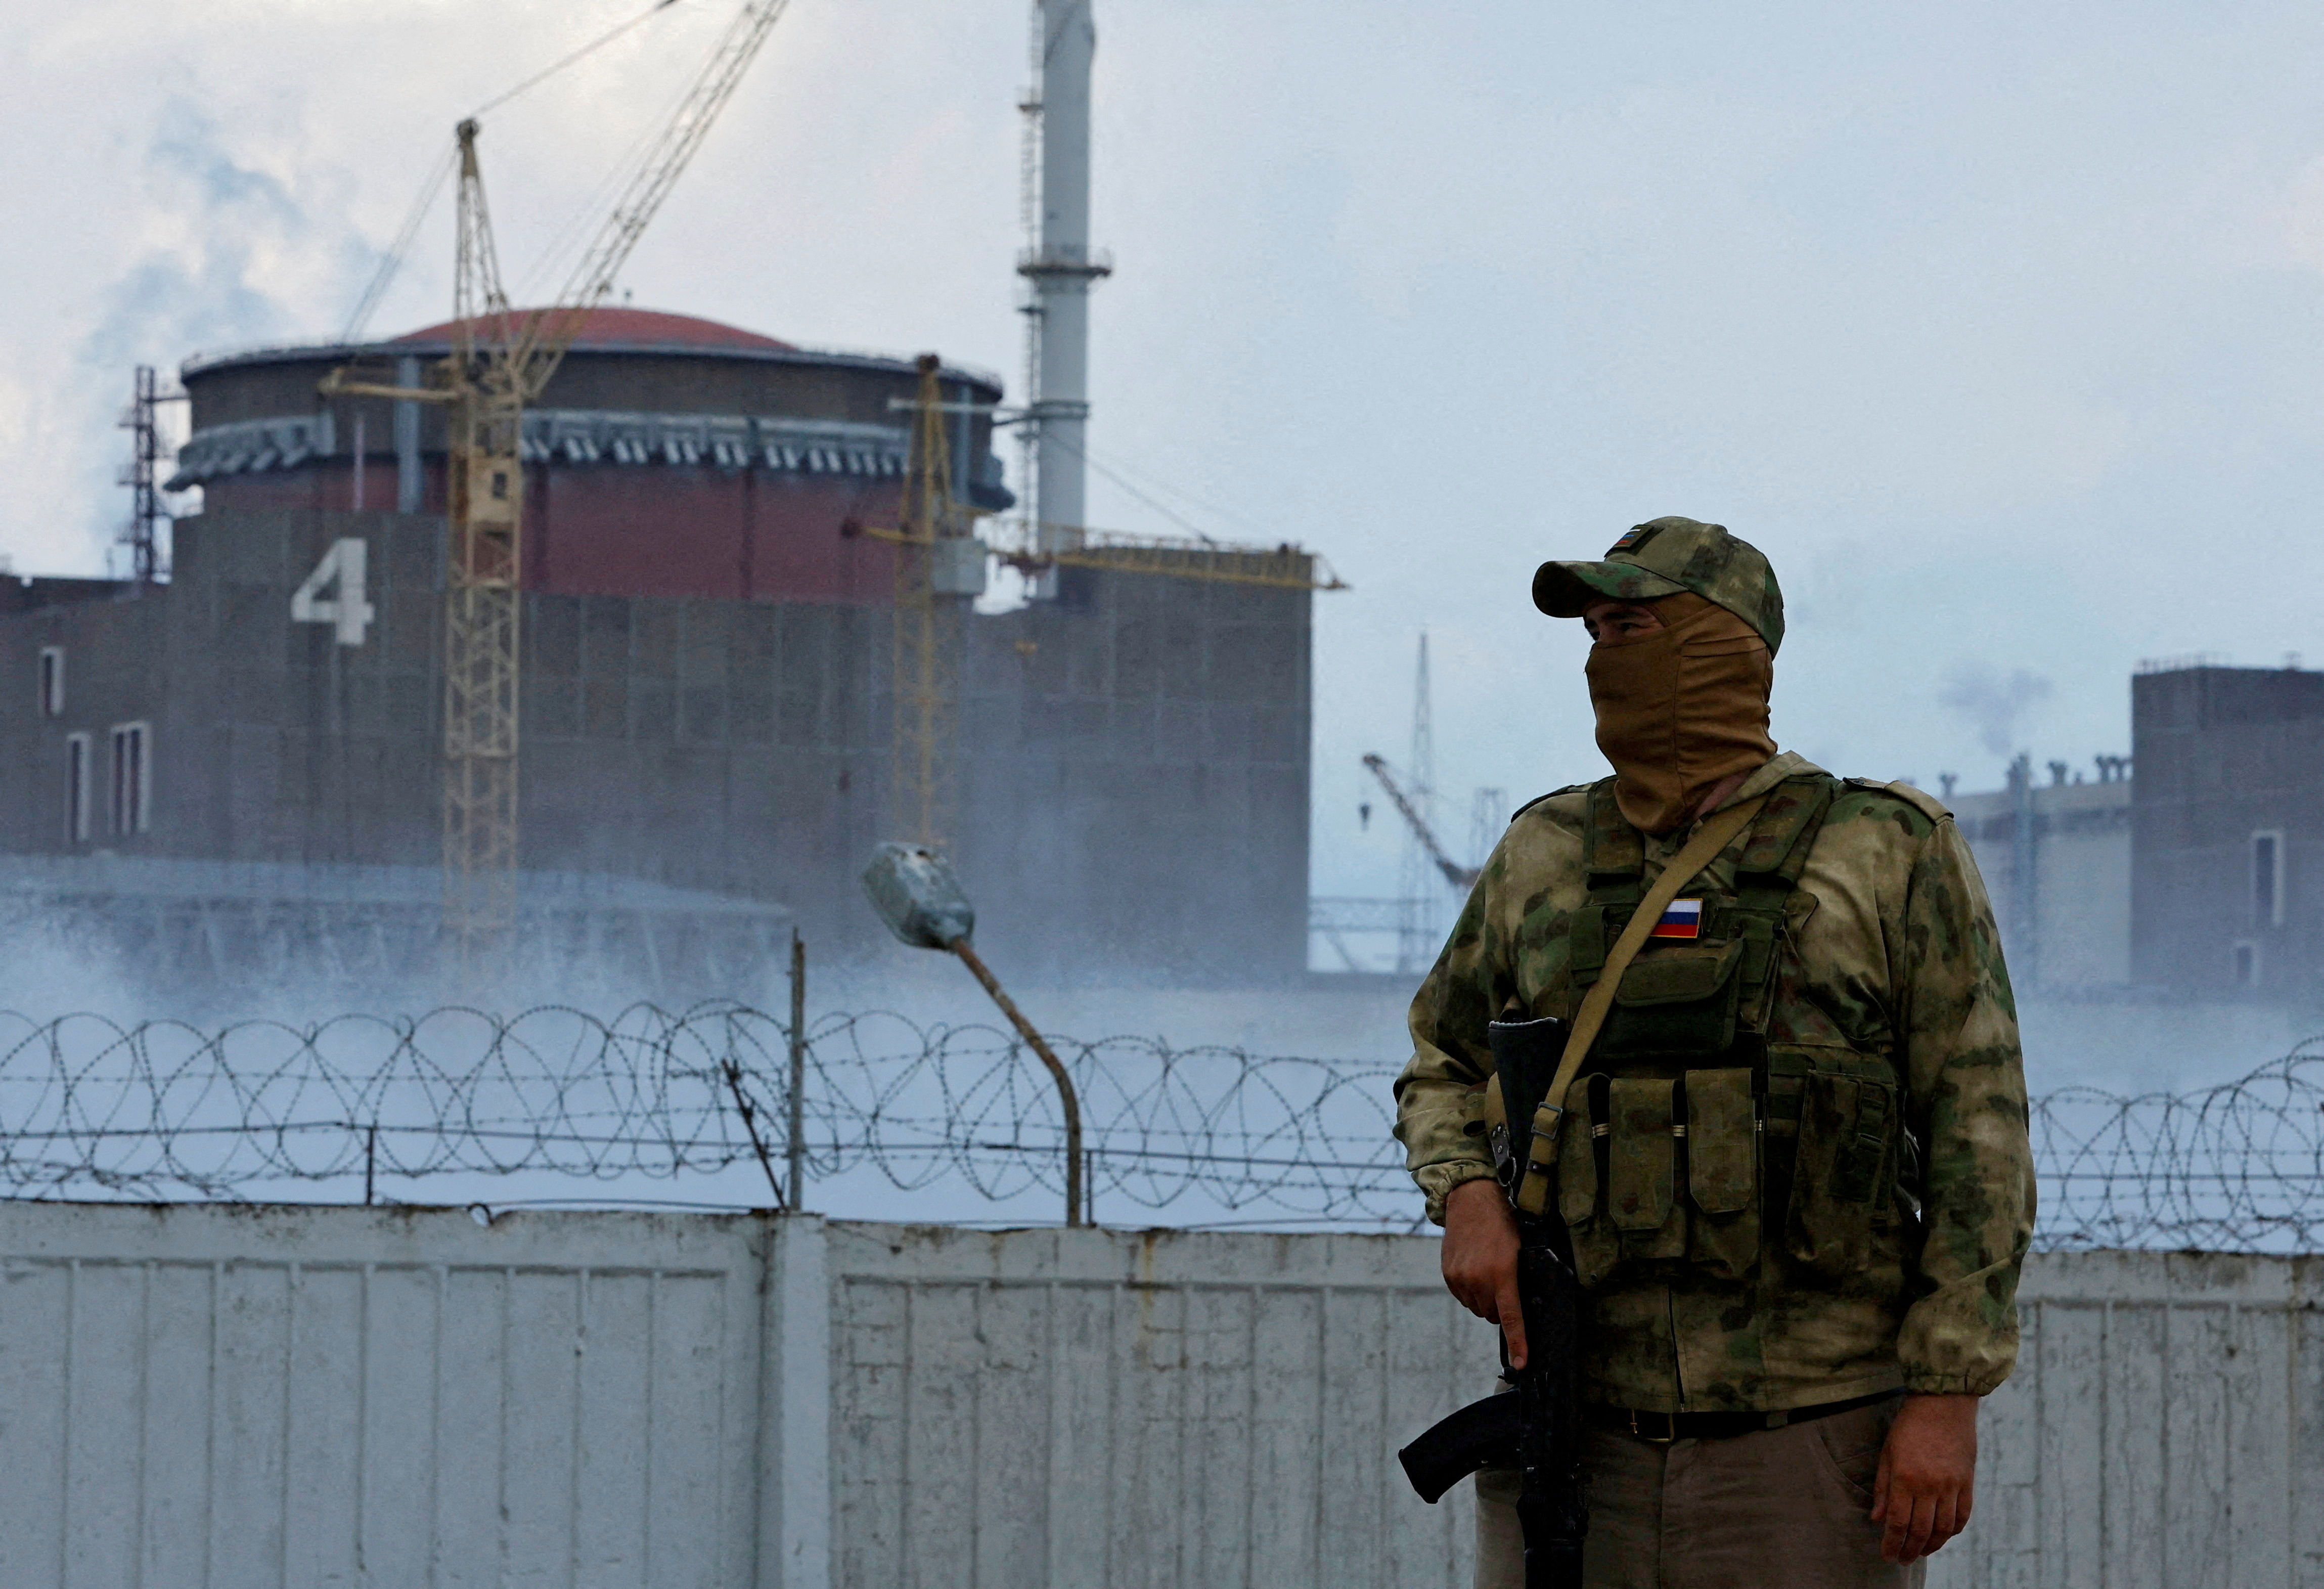 image Russia says it could shut frontline nuclear plant; Kyiv says that risks disaster